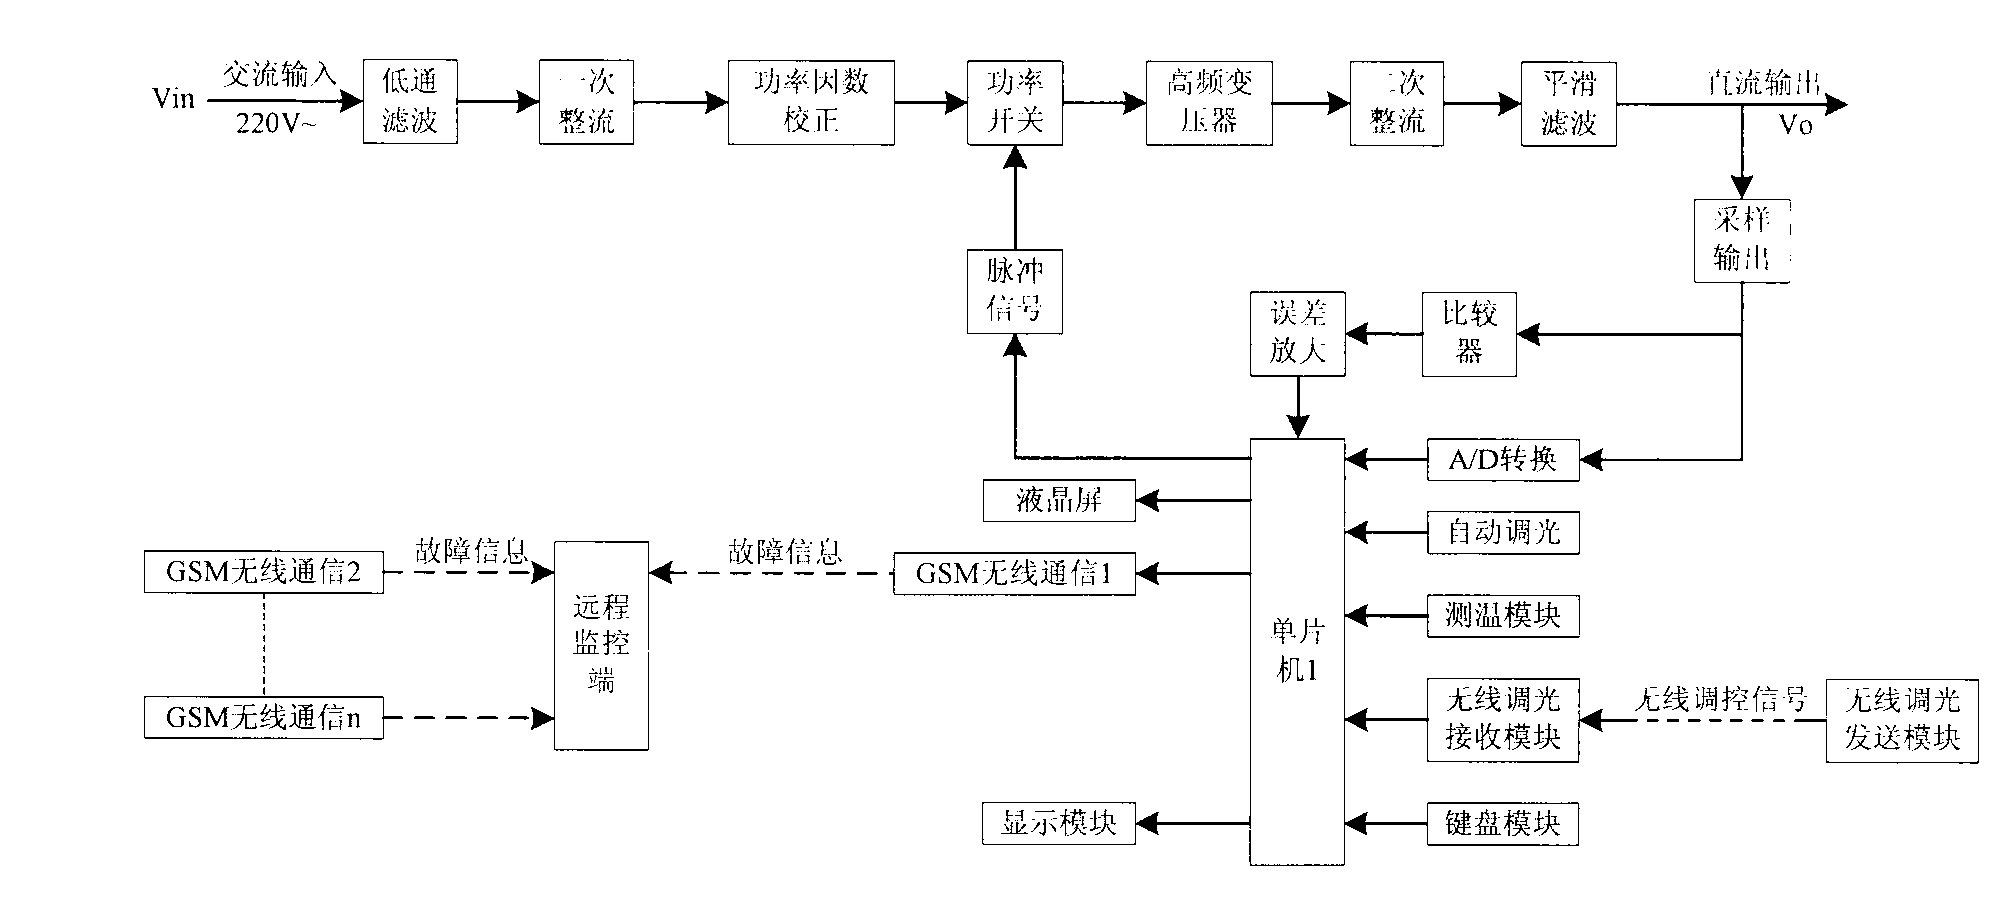 Green and intelligent numerical-control light emitting diode (LED) driving power supply